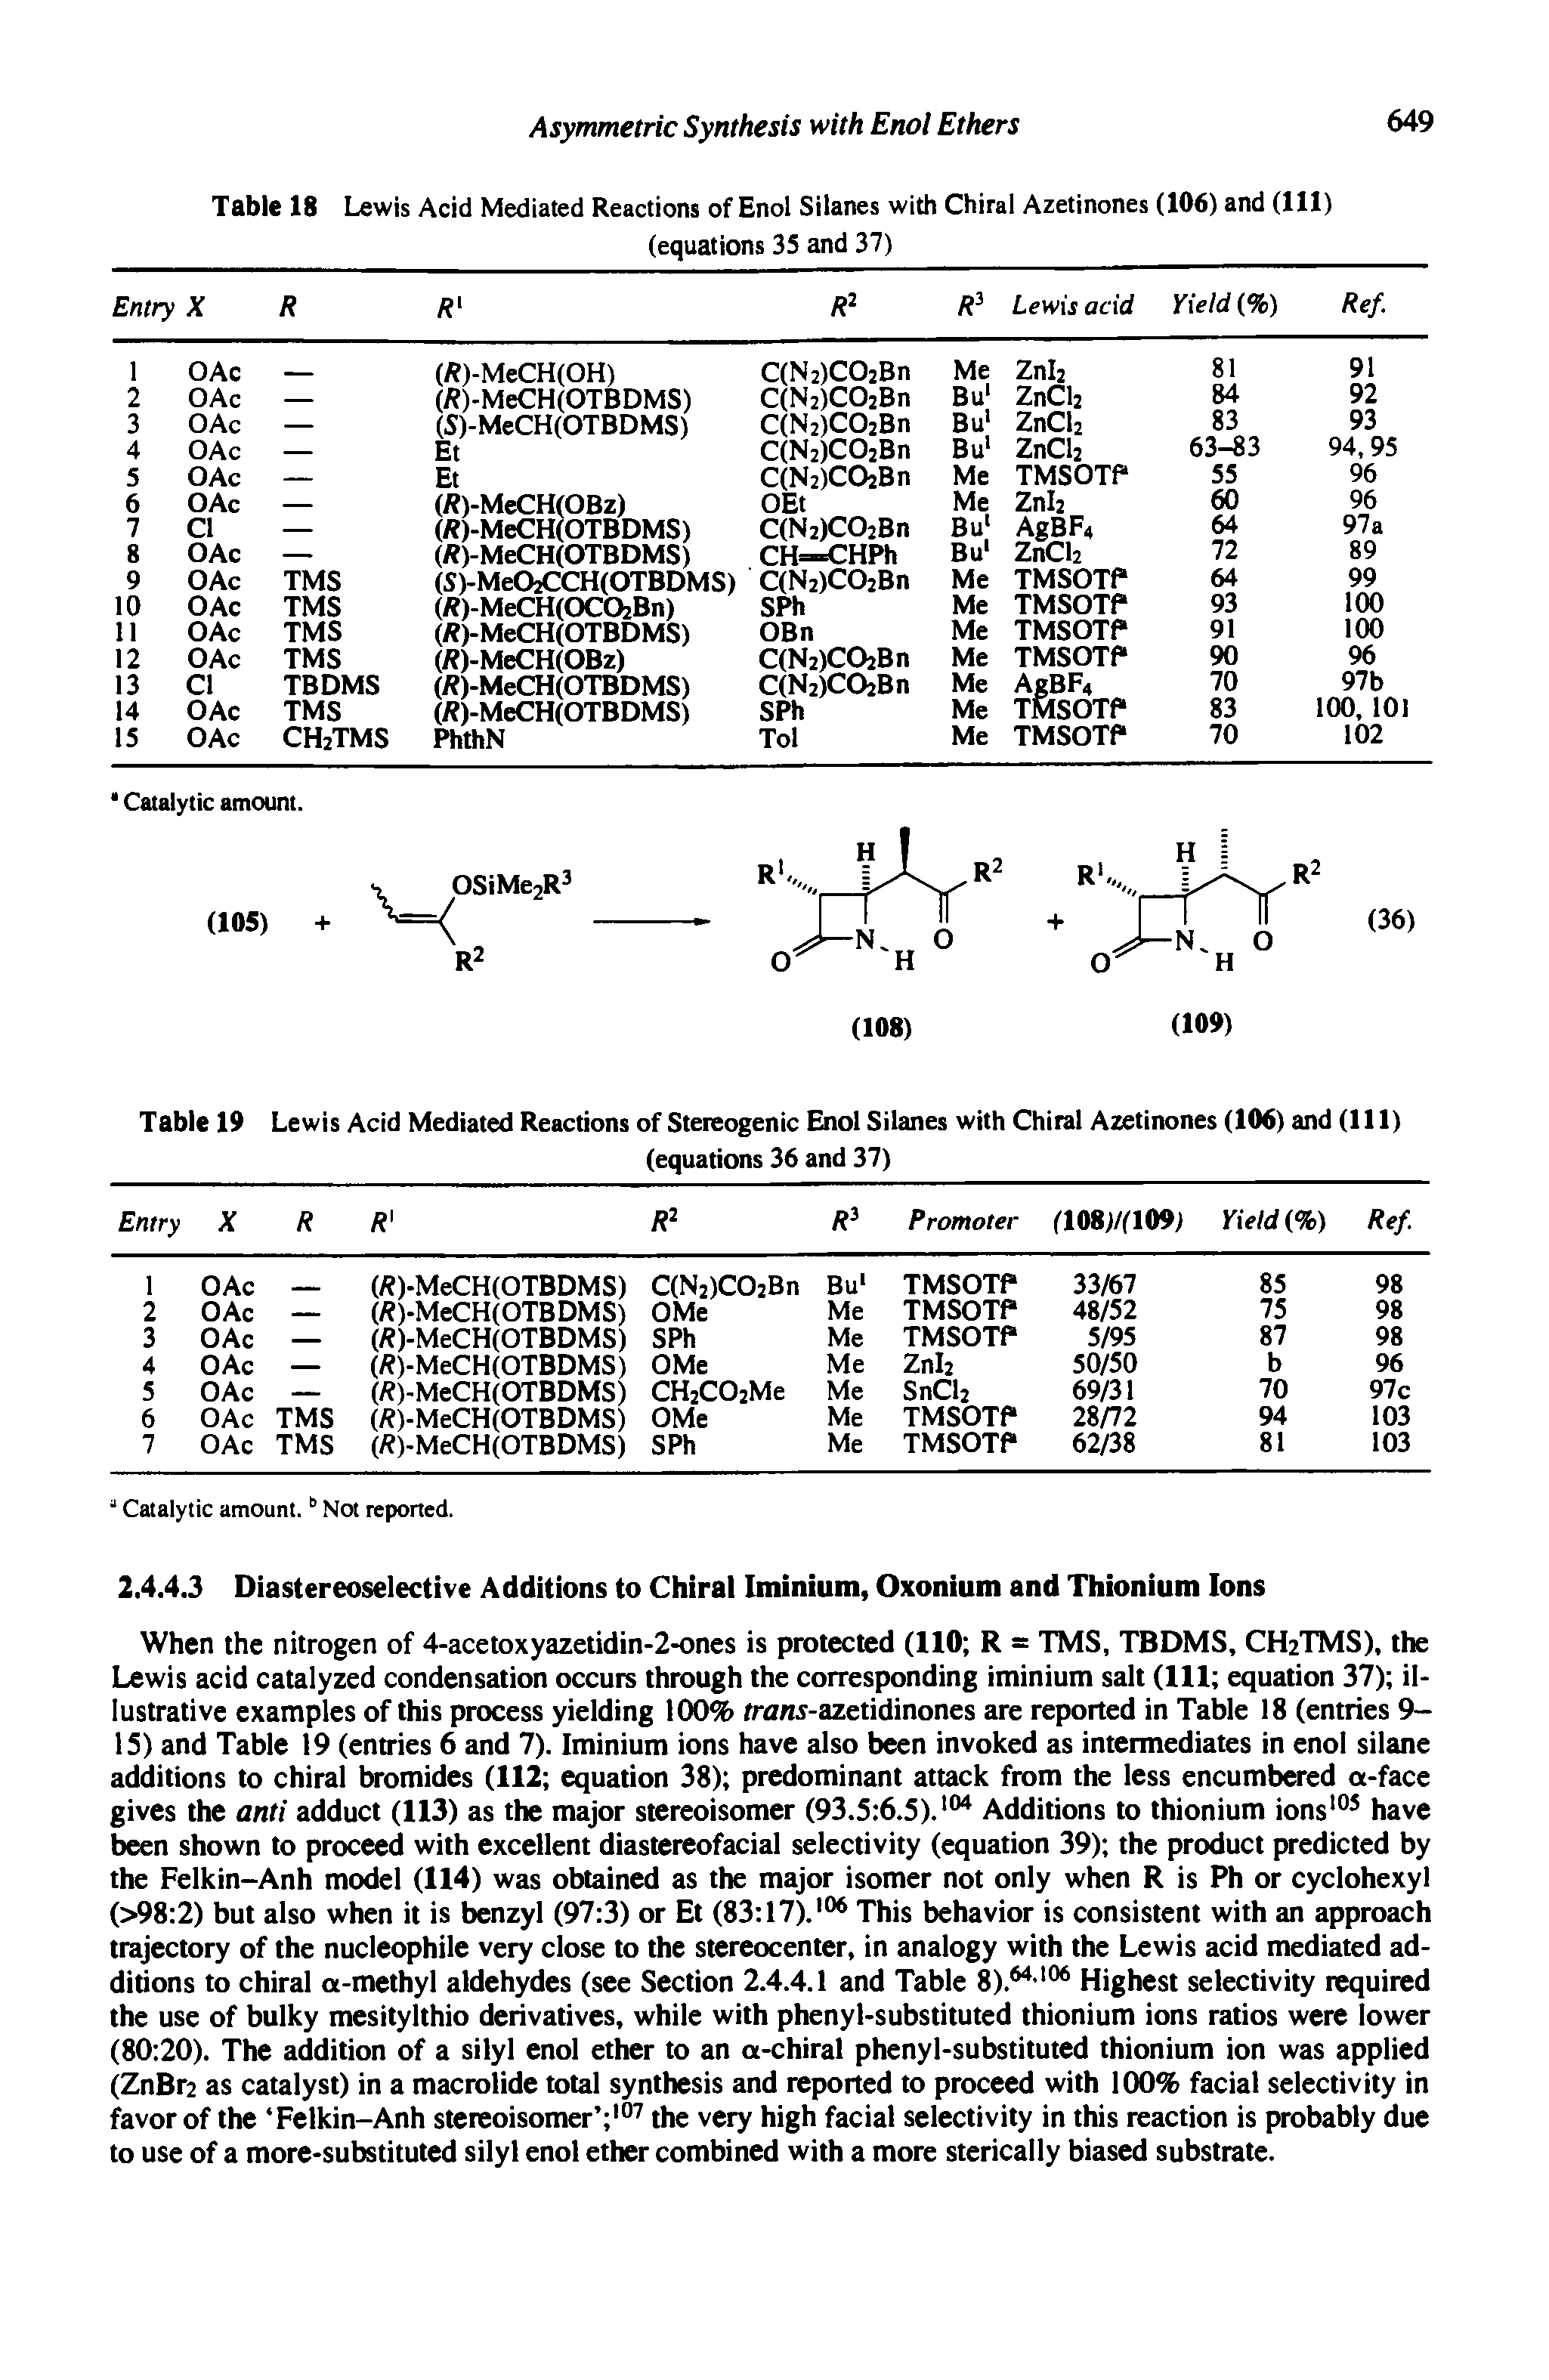 Table 19 Lewis Acid Mediated Reactions of Stereogenic Enol Silanes with Chiral Azetinones (106) and (111)...